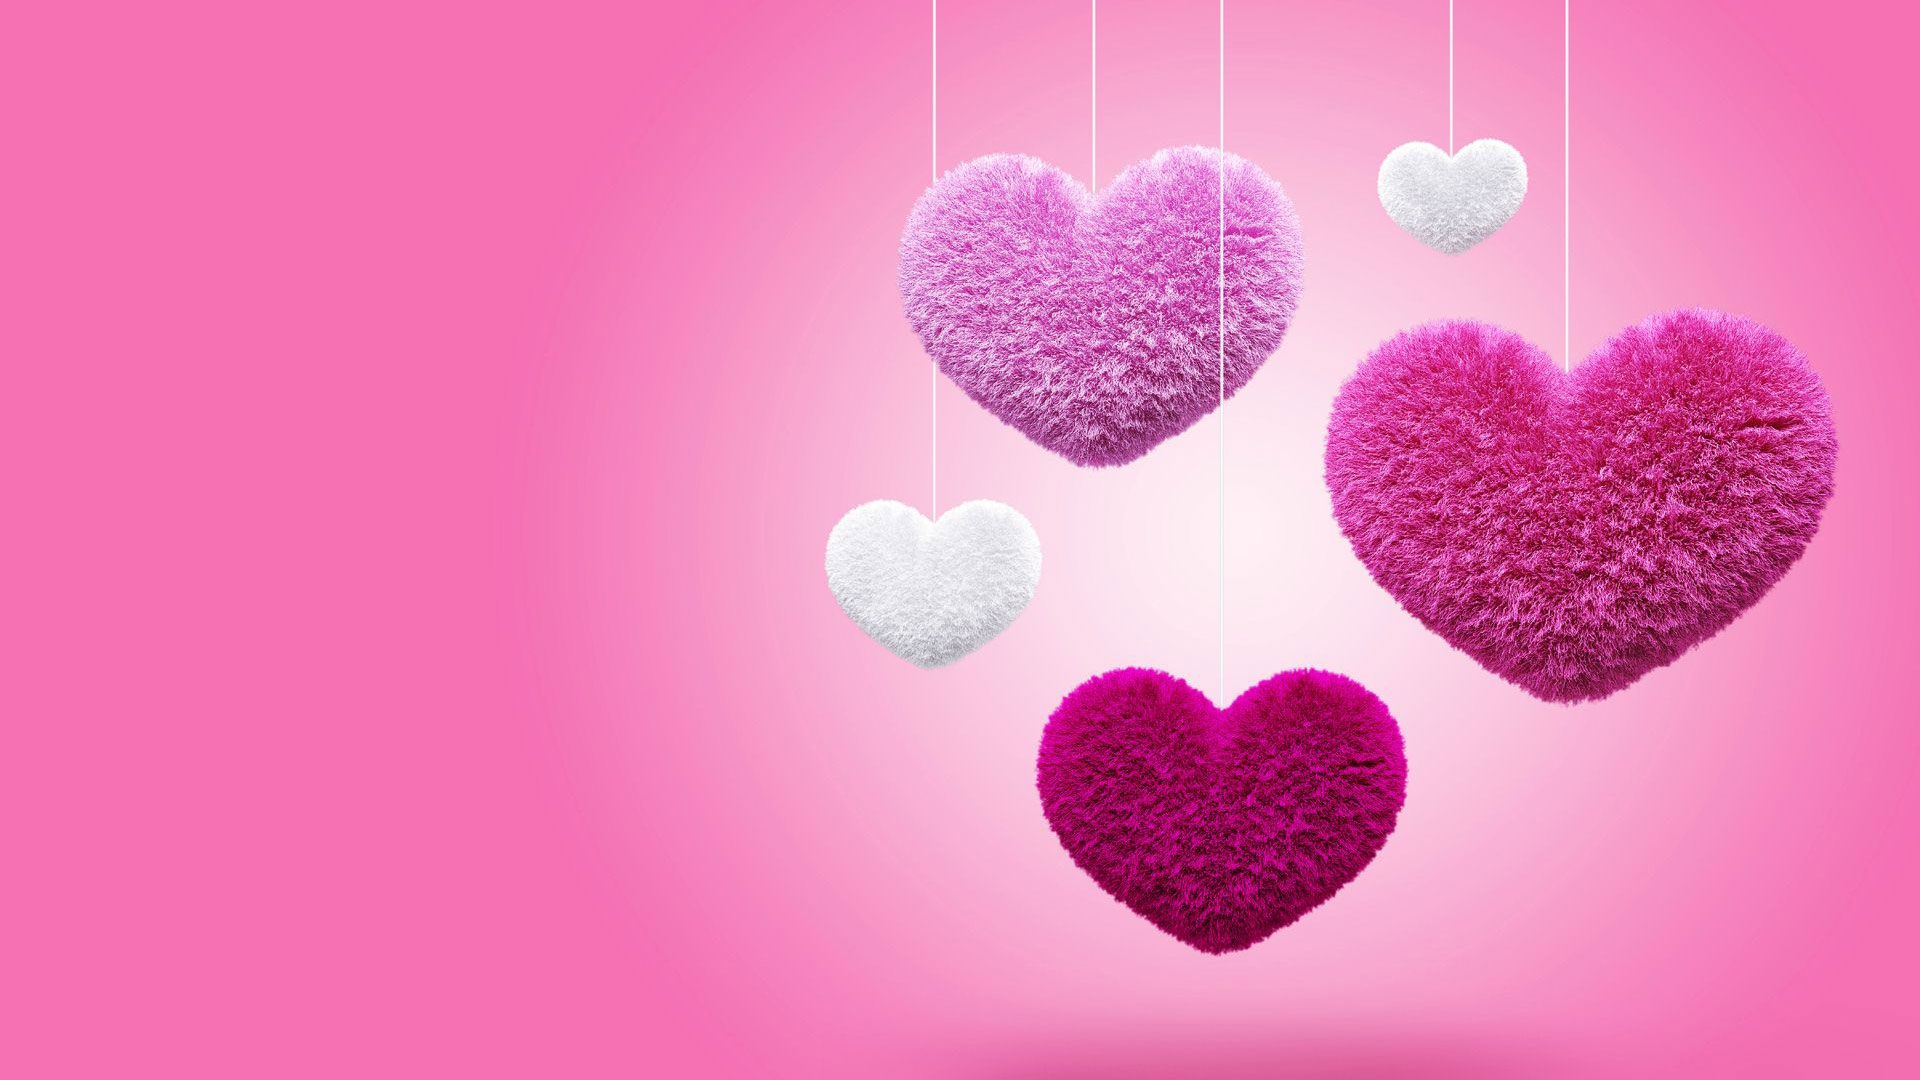 Free download Pink Heart HD Wallpaper Picture Image [1920x1080] for your Desktop, Mobile & Tablet. Explore Pink Heart Background. Pink Heart Background, Heart Wallpaper, Pink Heart Wallpaper